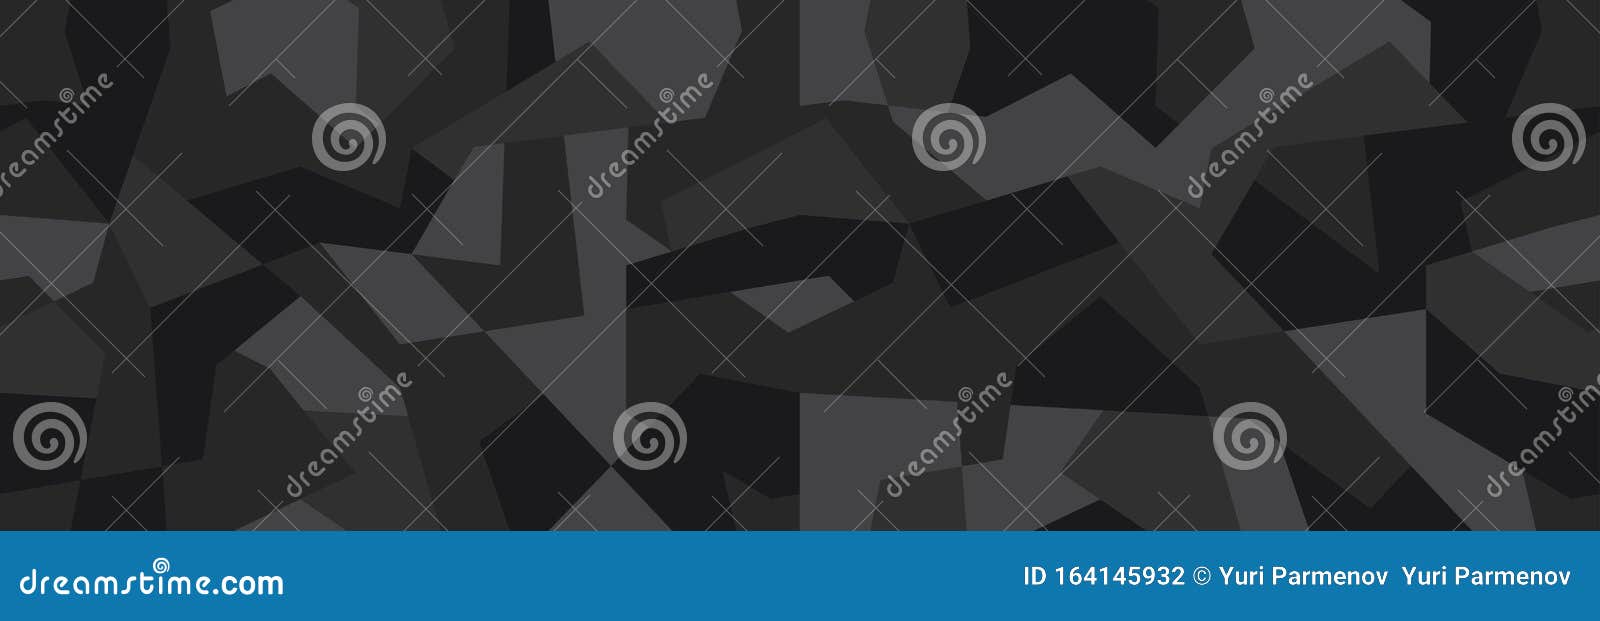 geometric camouflage seamless pattern. abstract modern camo, black and white modern military texture background